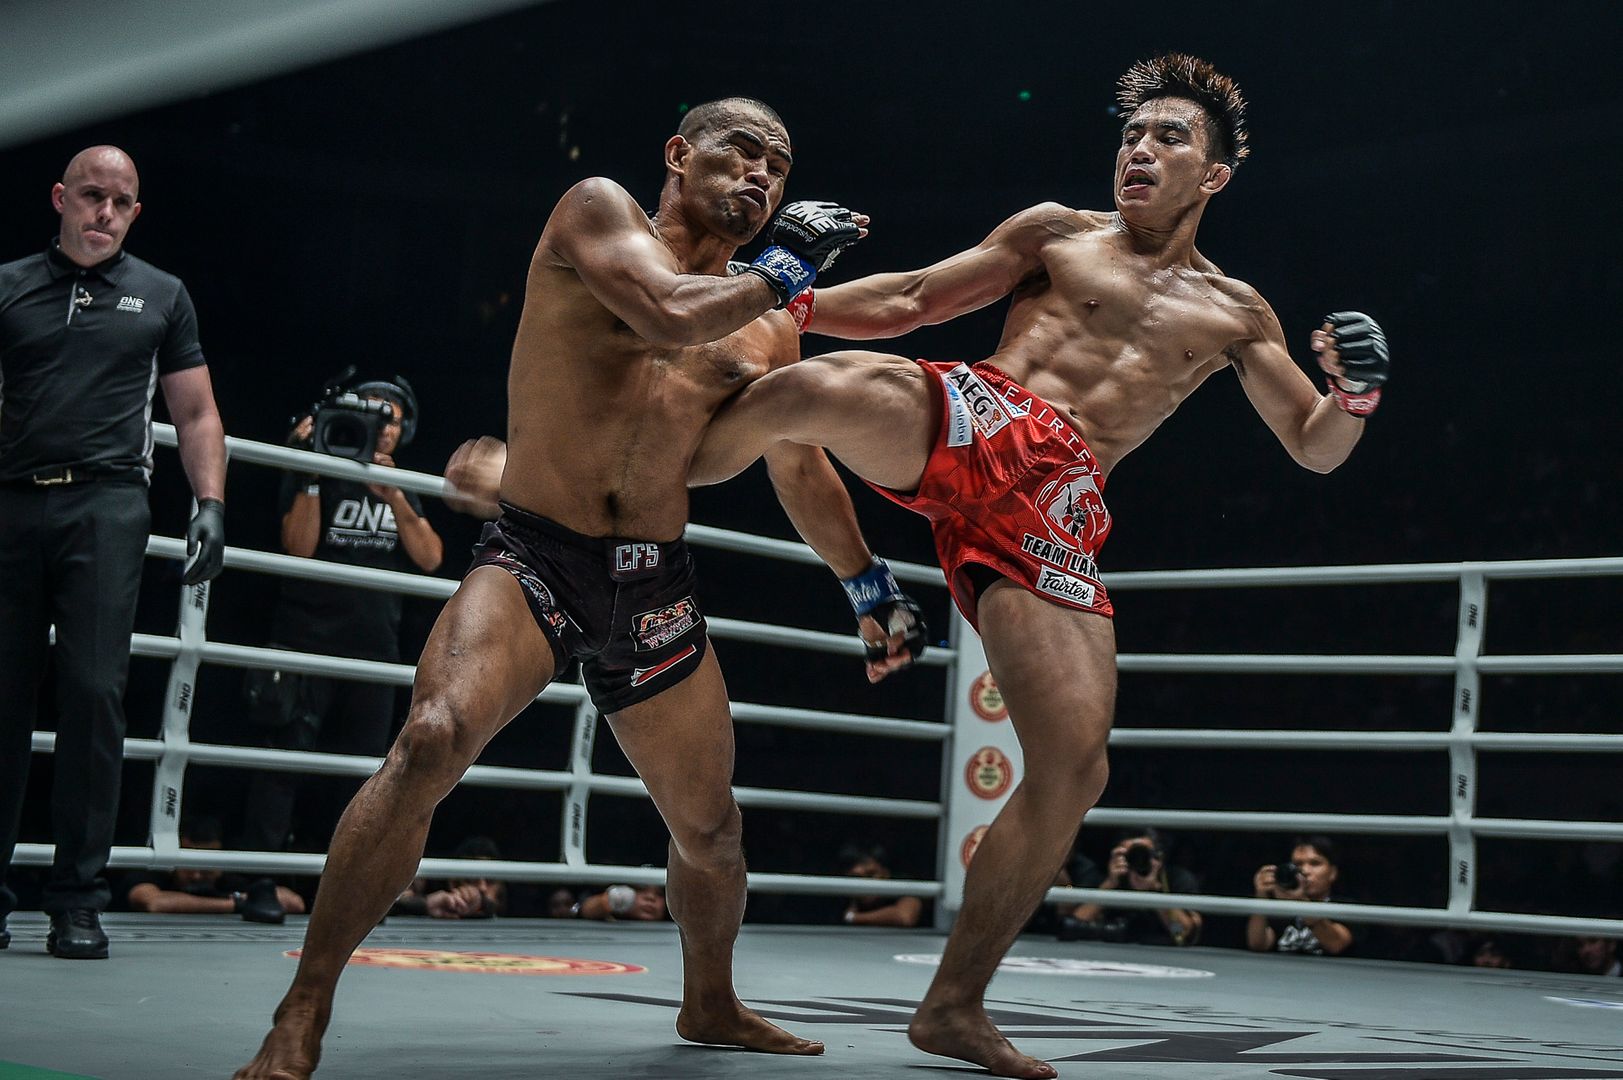 ONE-Masters-of-Fate-Joshua-Pacio-def-Rene-Catalan ONE Championship returns to ‘Mecca of Philippine MMA’ Mixed Martial Arts News ONE Championship  - philippine sports news